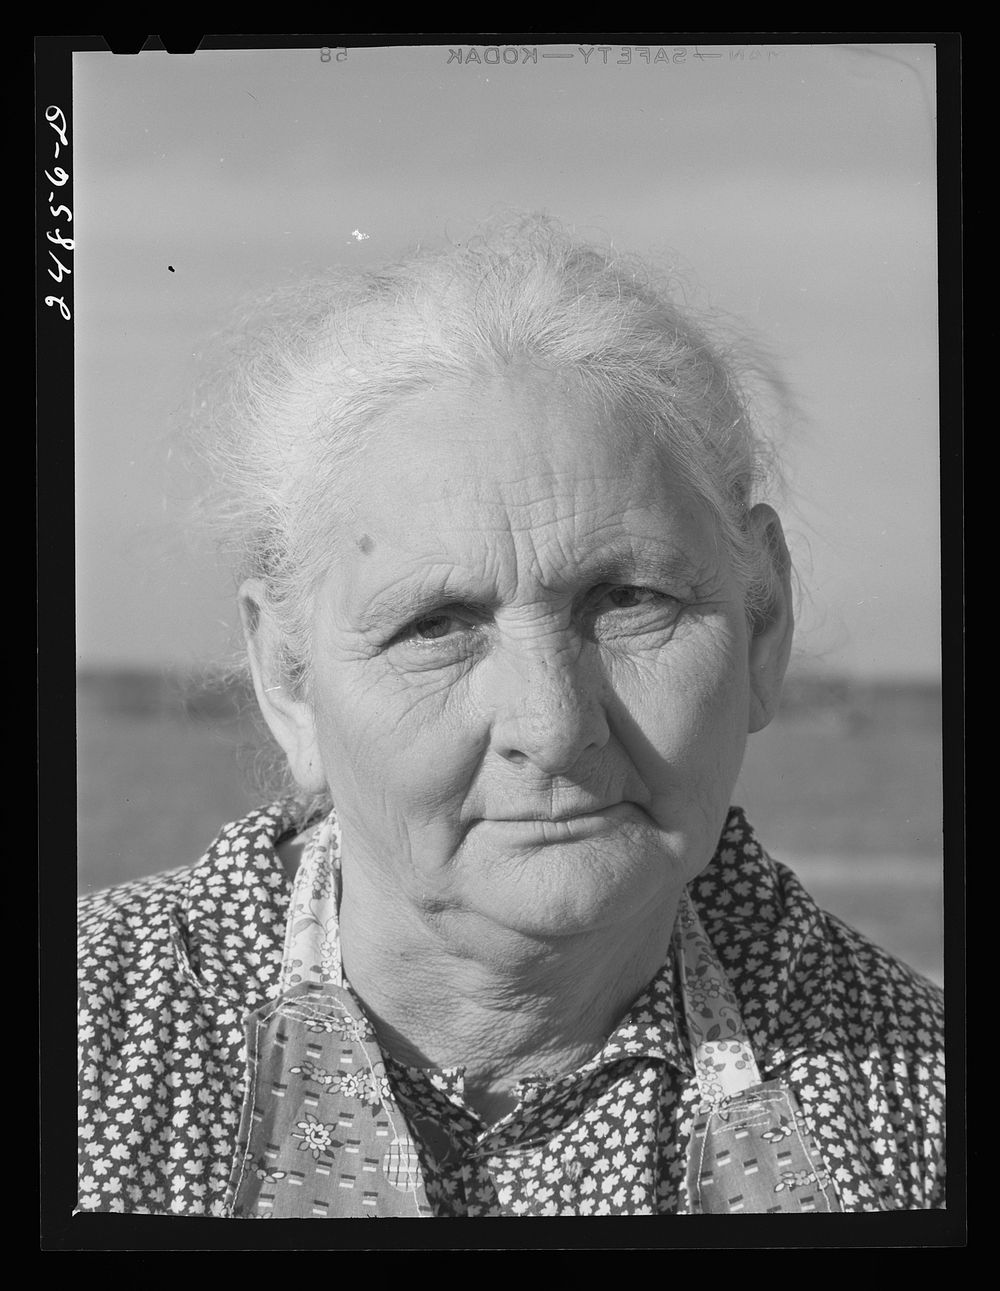 Mother of migratory worker. FSA (Farm Security Administration) camp, Robstown, Texas. Sourced from the Library of Congress.